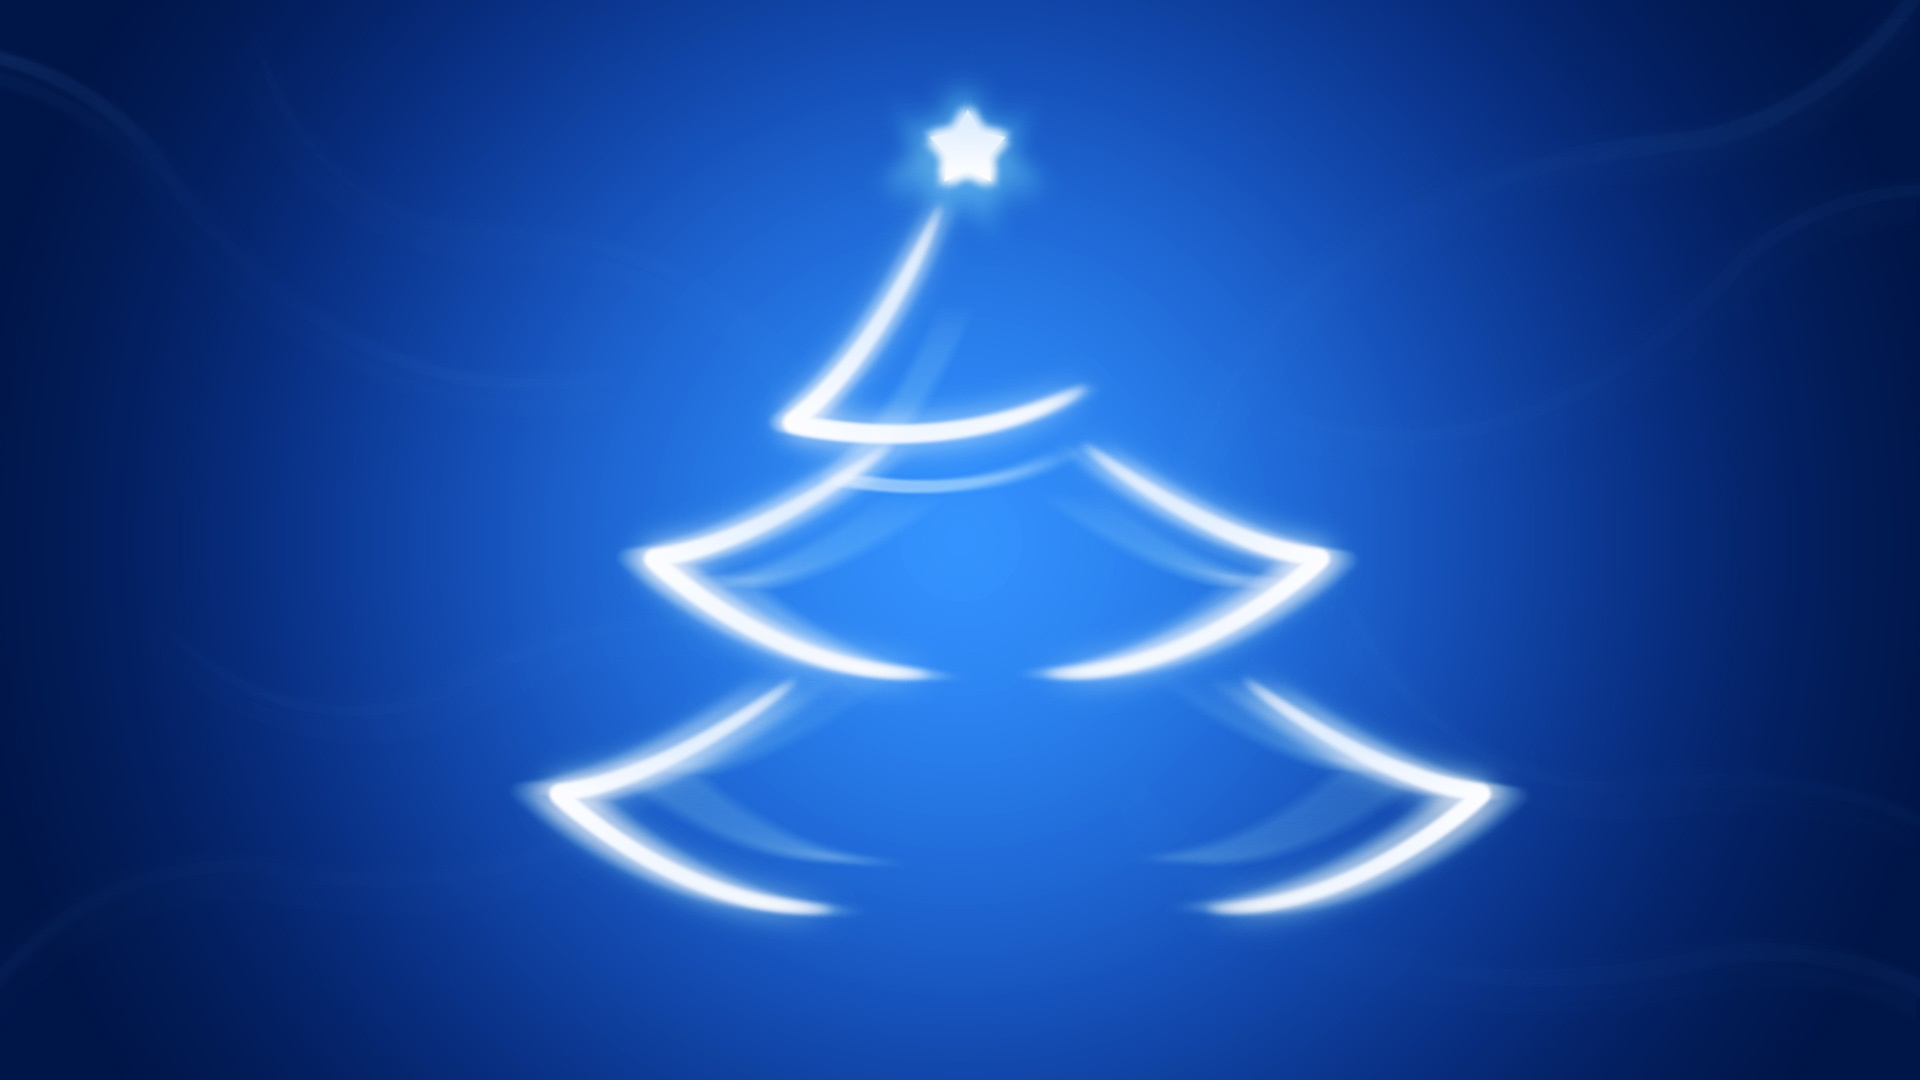 merry christmas wallpapers laptop